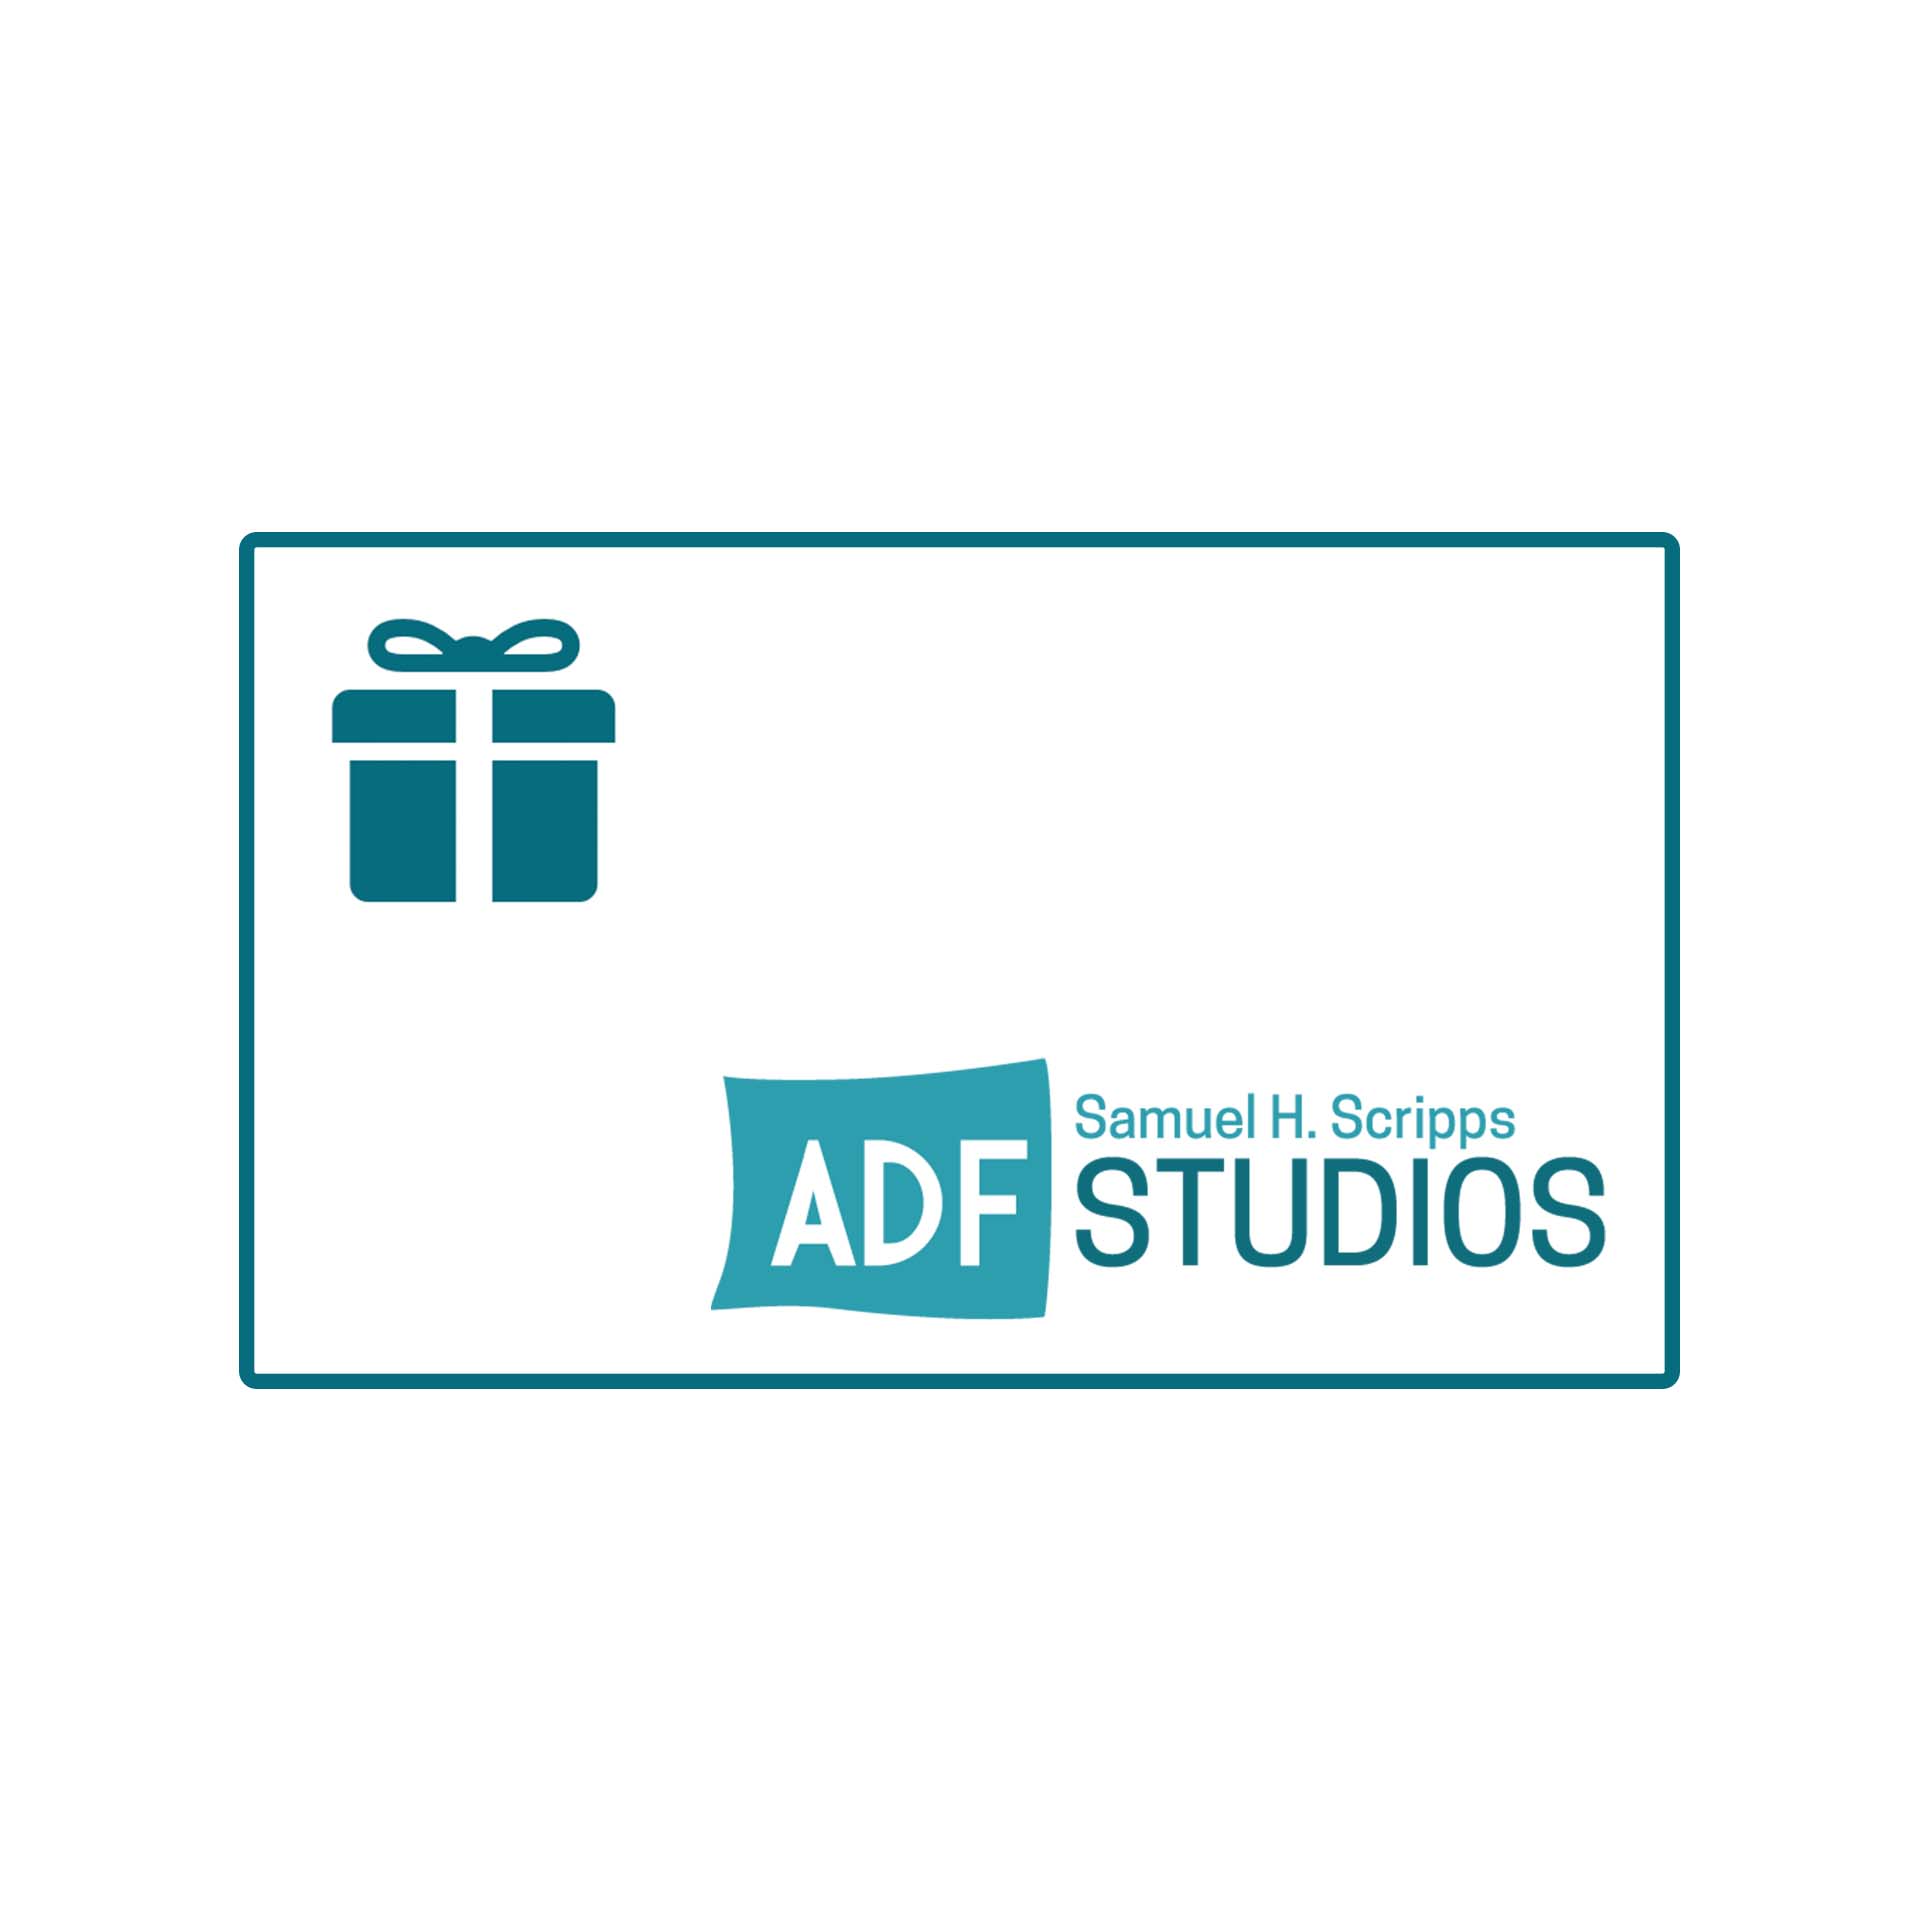 A card with a gift icon that also says ADF Scripps Studios